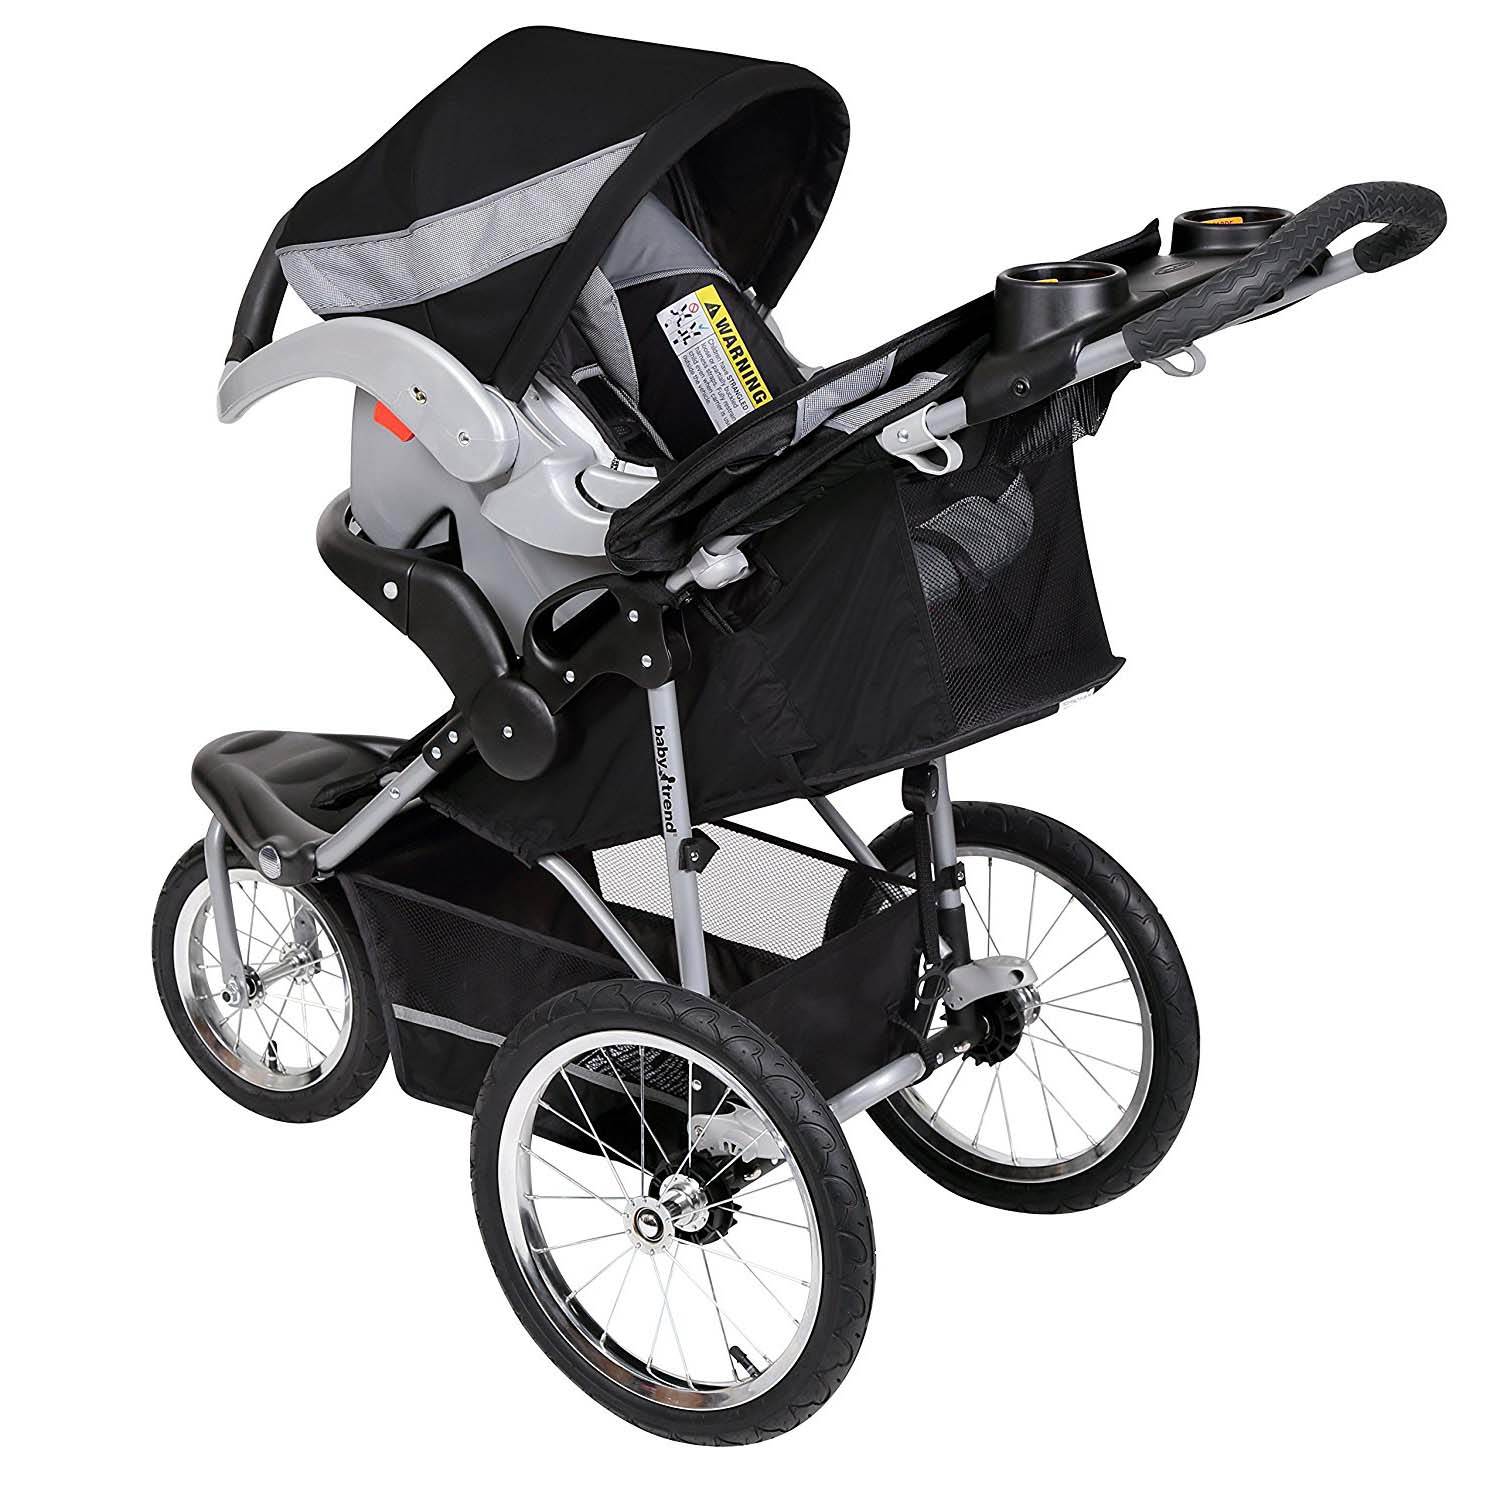 Baby Trend Expedition Travel System Stroller, Millennium White - image 4 of 7